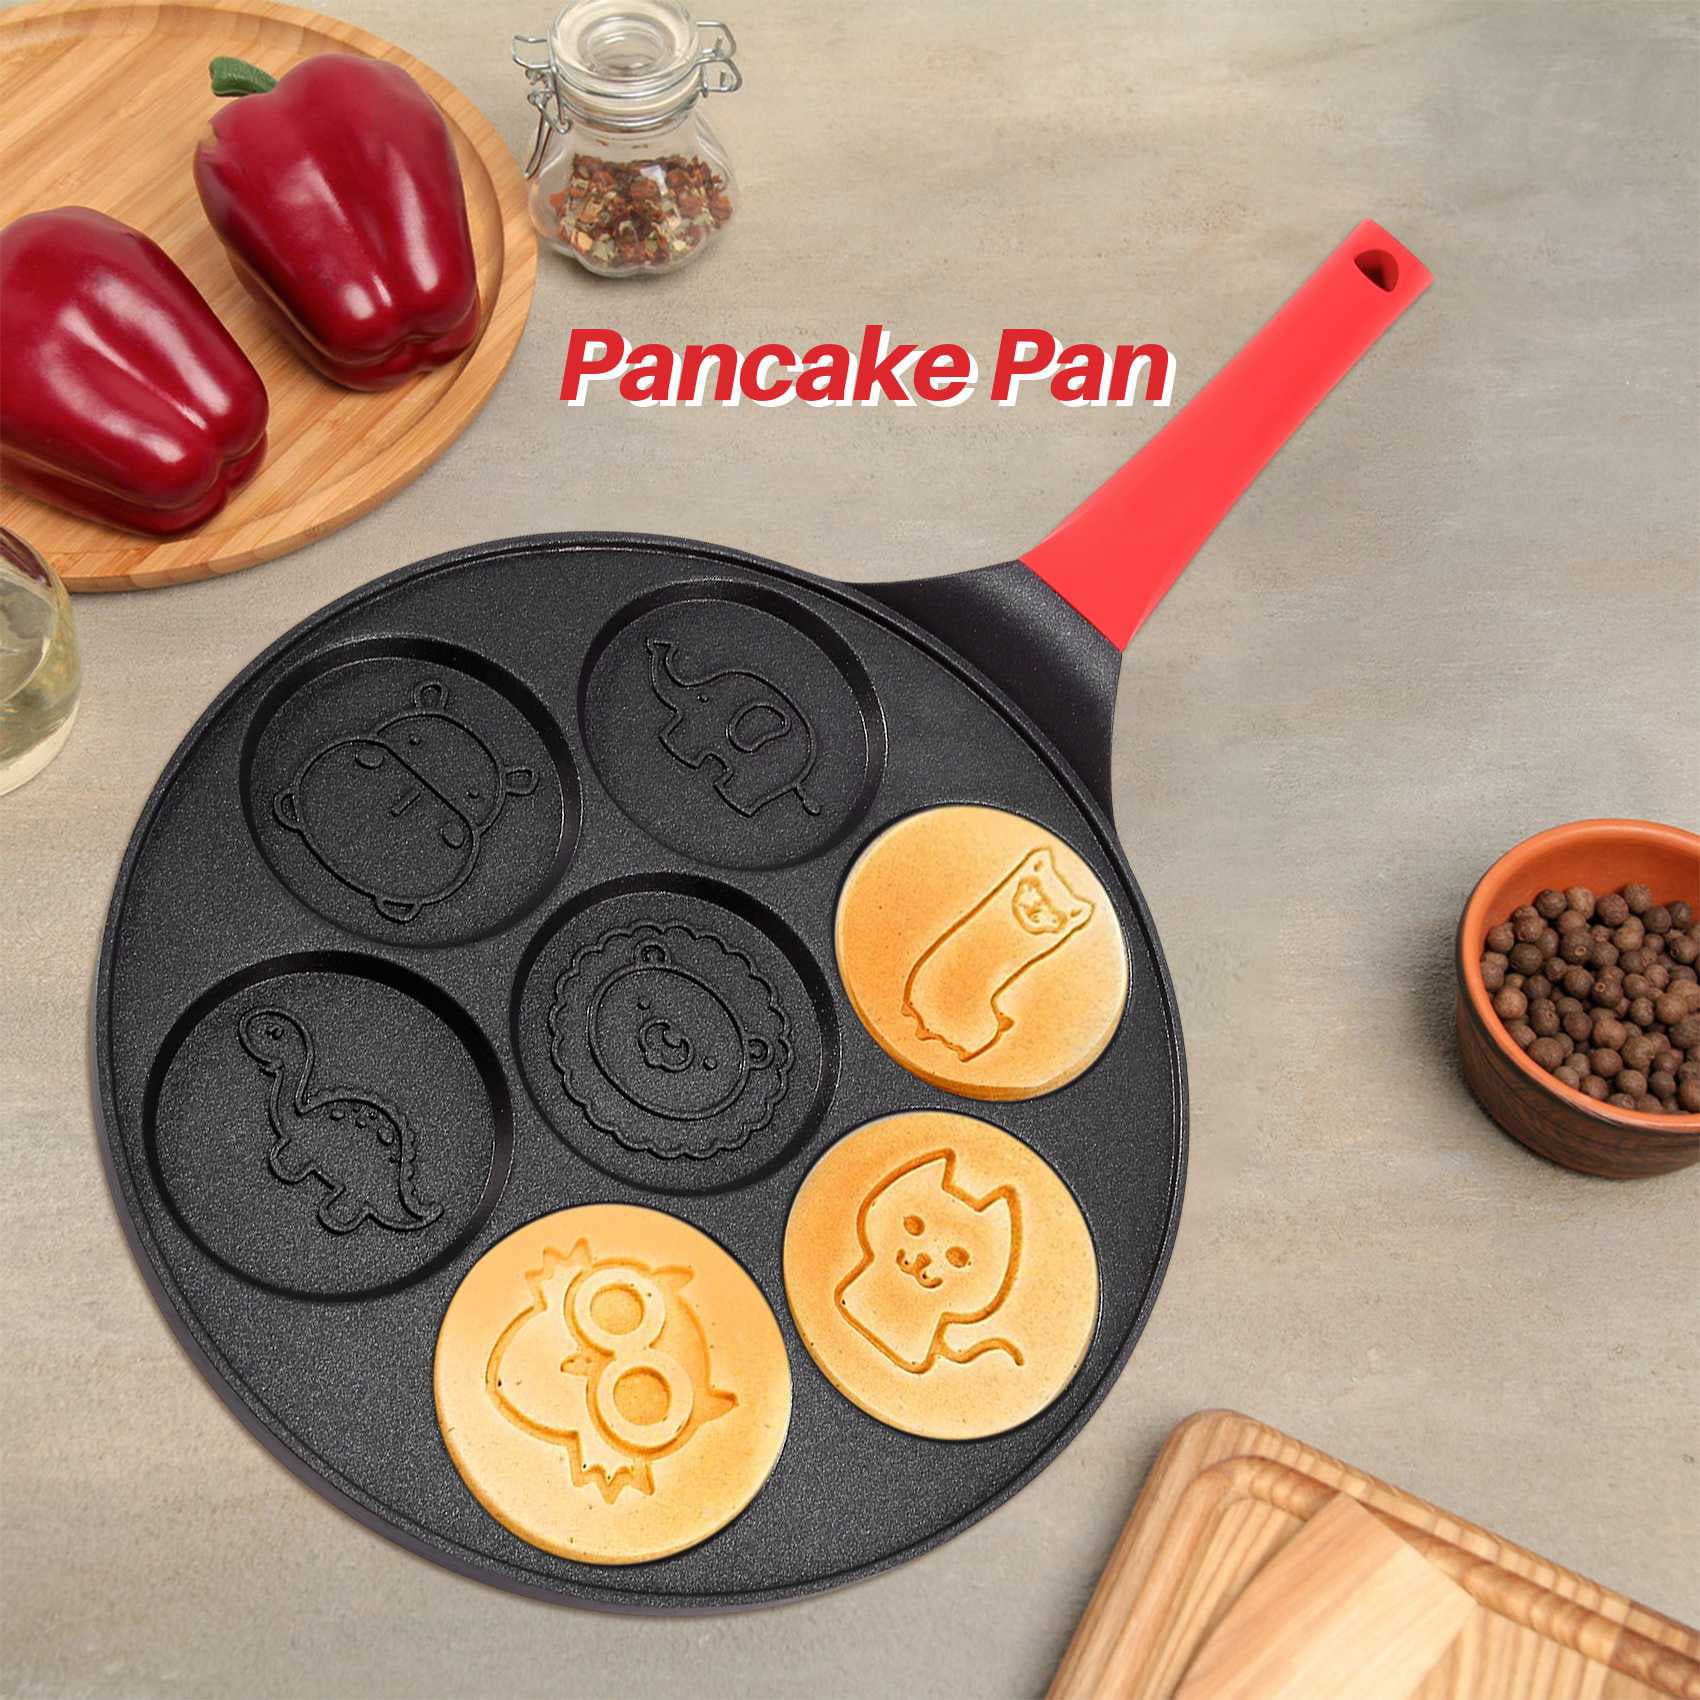 Oukaning 7'' Electric Non-Stick Crepe Maker Baking One-Button Griddle Pancake Pan Frying Griddle Machine 600W with Tray for Kids, Size: 40*24*10cm